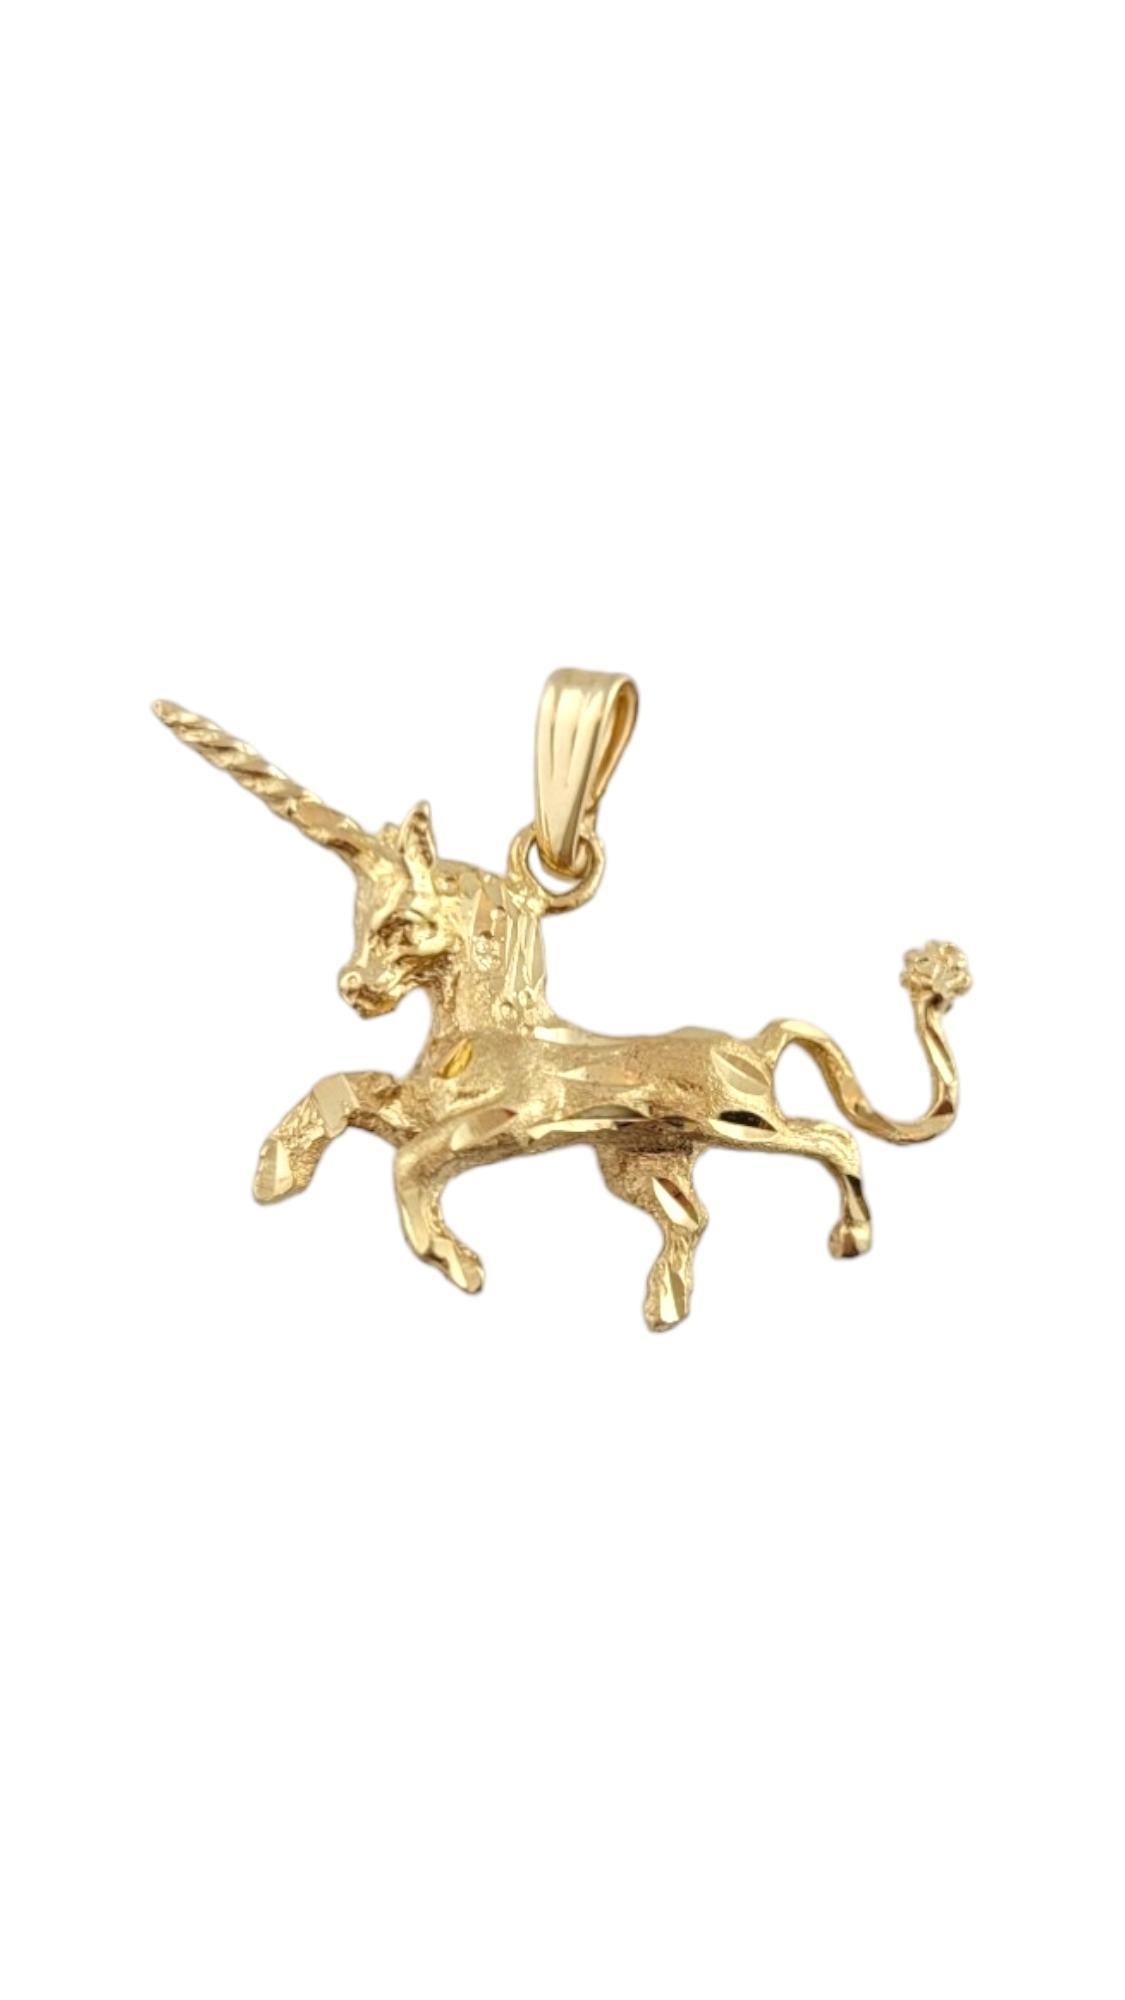 Vintage 14K Yellow Gold Unicorn Charm 

Unicorn charm meticulously detailed in 14 karat yellow gold.

Tested 14K.

Weight: 3.2 g/ 2.1 dwt.

Measurements: 21.13 mm X 24.8 mm

Very good condition, professionally polished.

Will come packaged in a gift